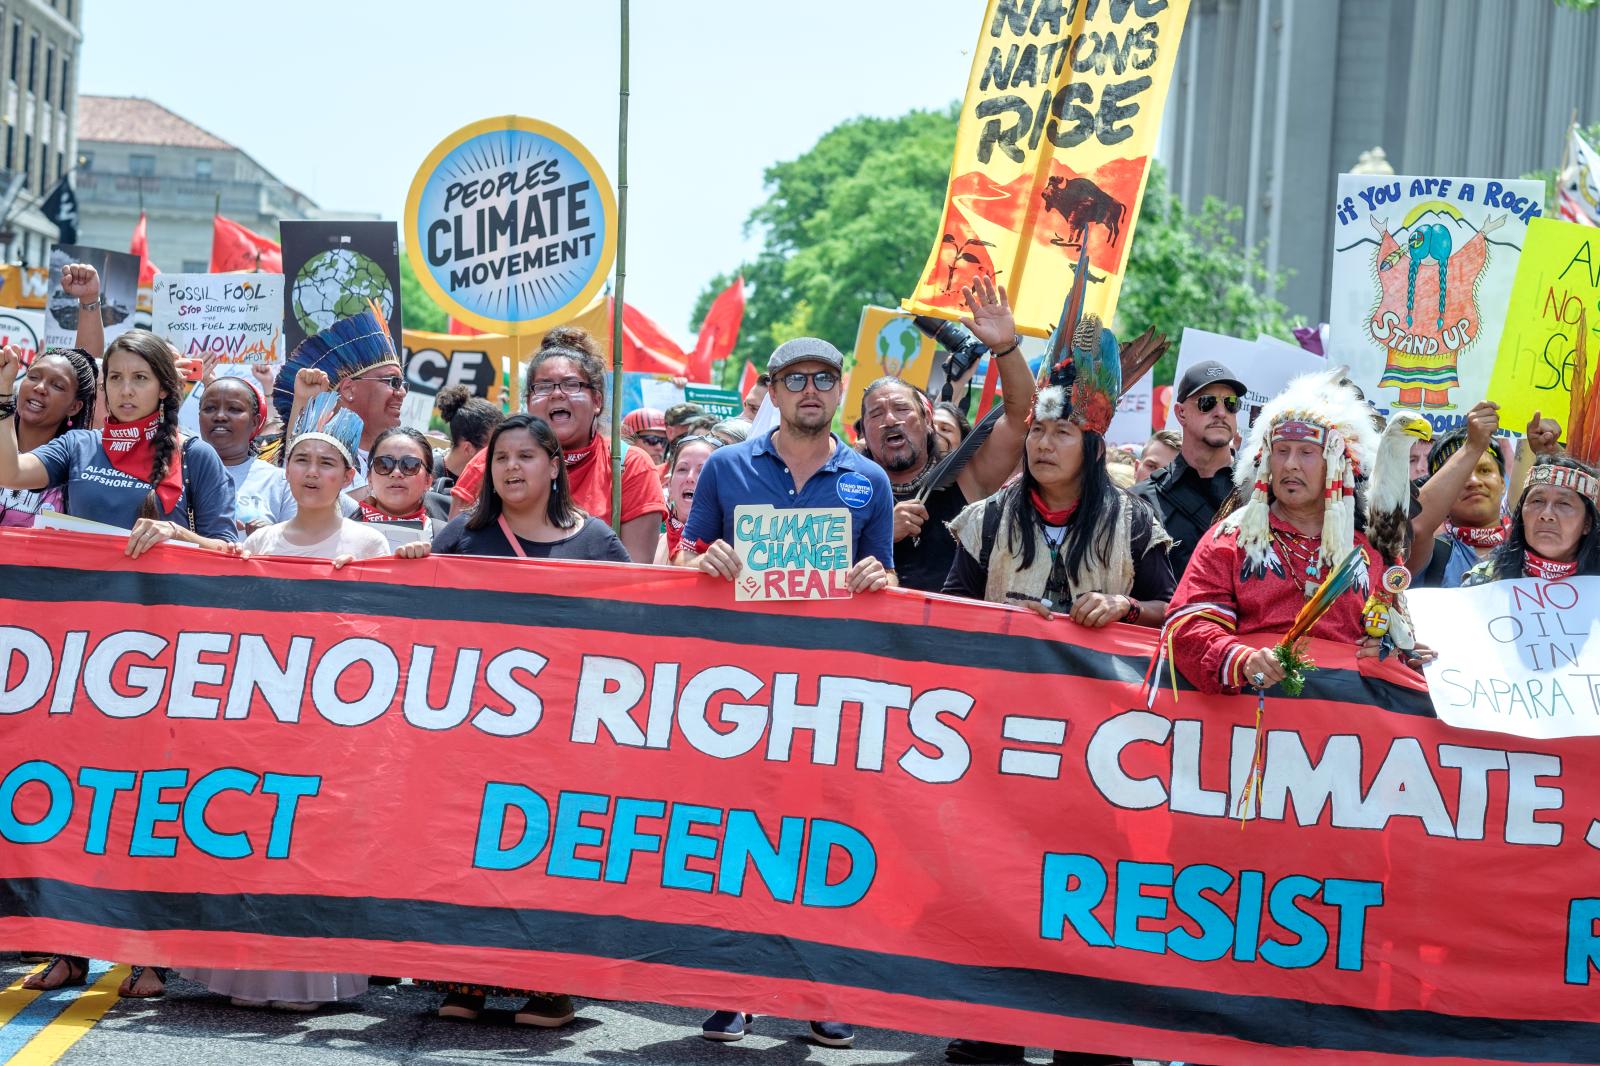 The People's Climate March